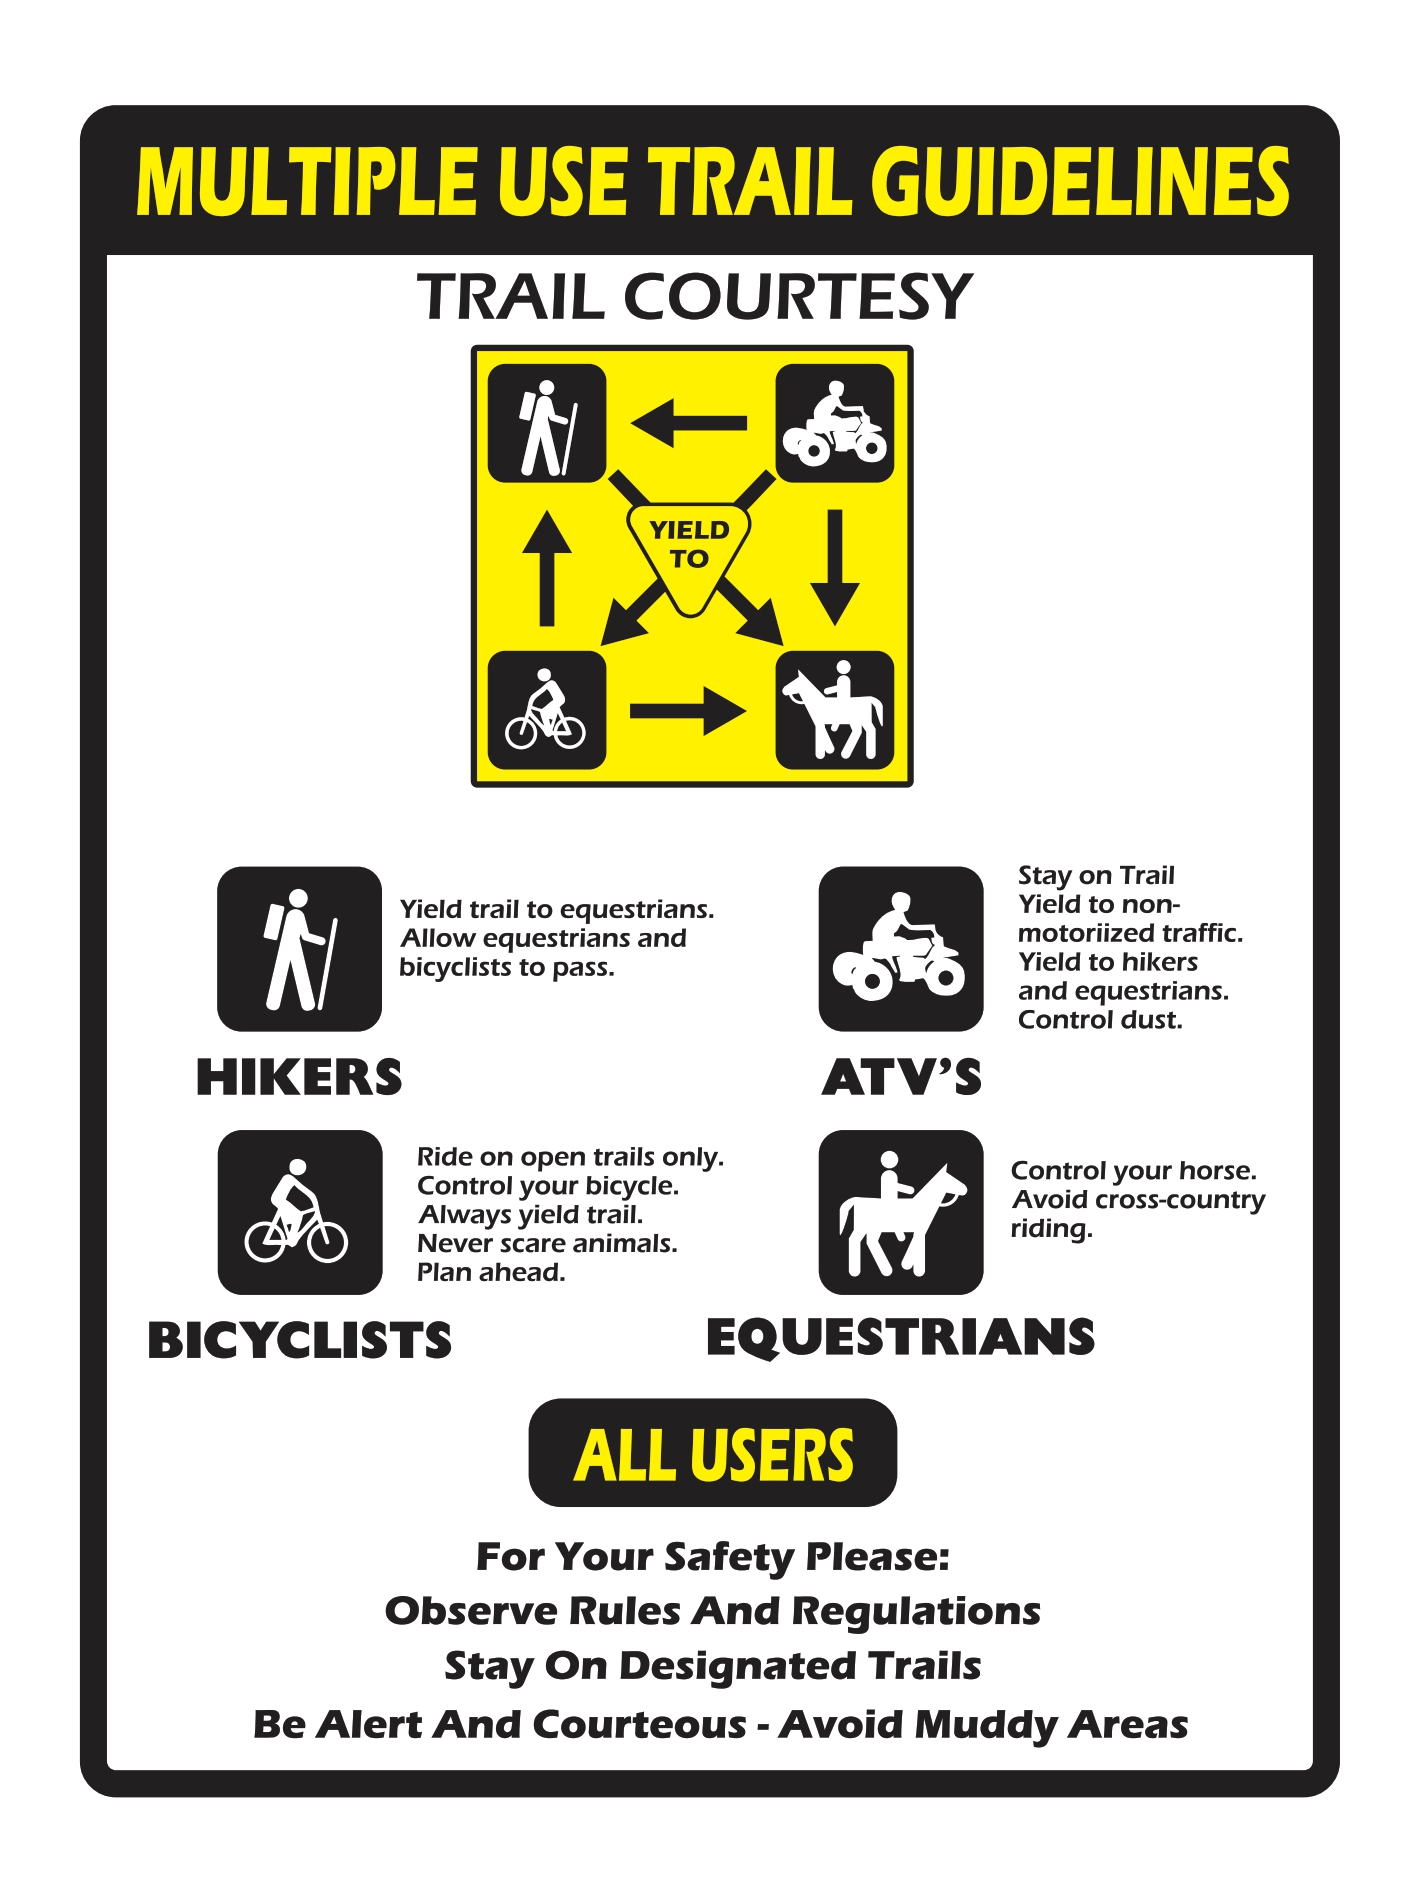 Poster outlining the multiple use trail guidelines and trail courtesy.  Hikers should yield trial to equestrians and allow equestrians and bicyclists to pass.  ATVs must stay on the trail and yield to all non motorized traffic.  Bicyclists must ride on open trial only. Control your bicycle, always yield trail, never scare animals, plan ahead.  Equestrians must control your horse, avoid cross-county riding.  All users for your safety please observe the rules and regulations, stay on the designated trail be alert and courteous and avoid muddy areas.